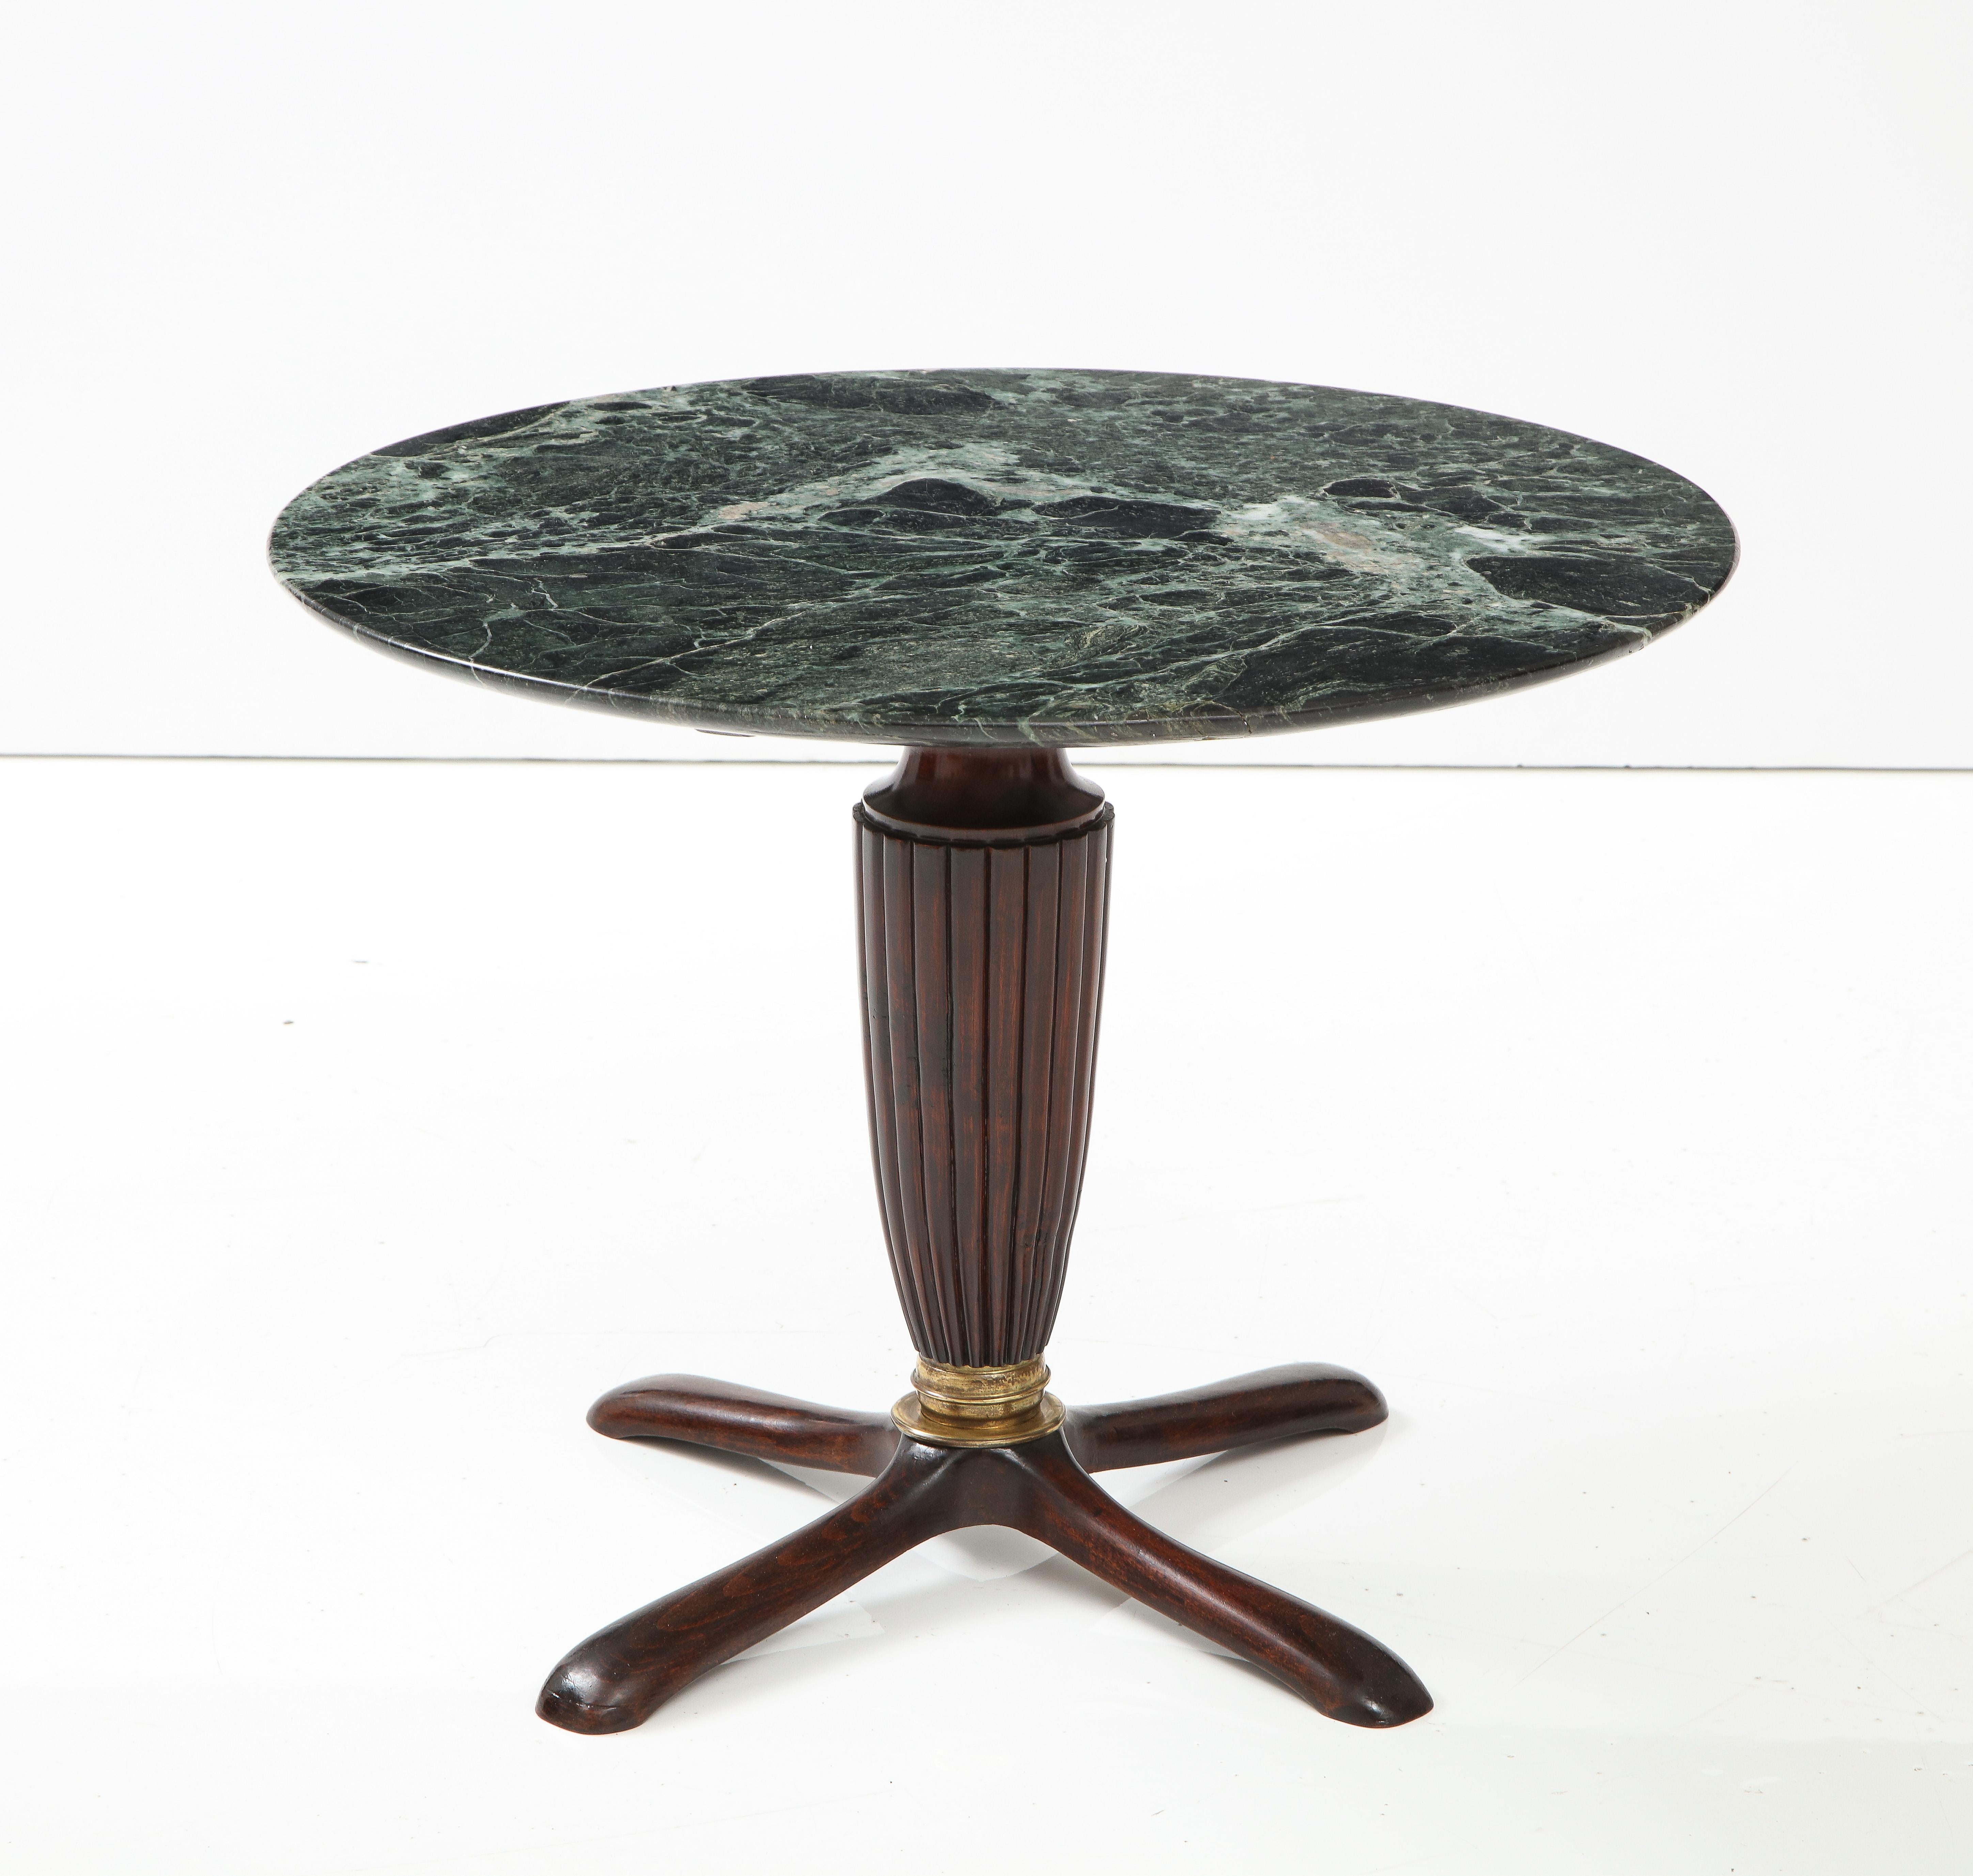 Italian Mahogany circular side table with Verdi Alpi marble top, 1940's. The pedestal fluted base of baluster form with a striking brass banding above the four splayed leg supports. 
Italy, circa 1940 
Size: 18 3/4